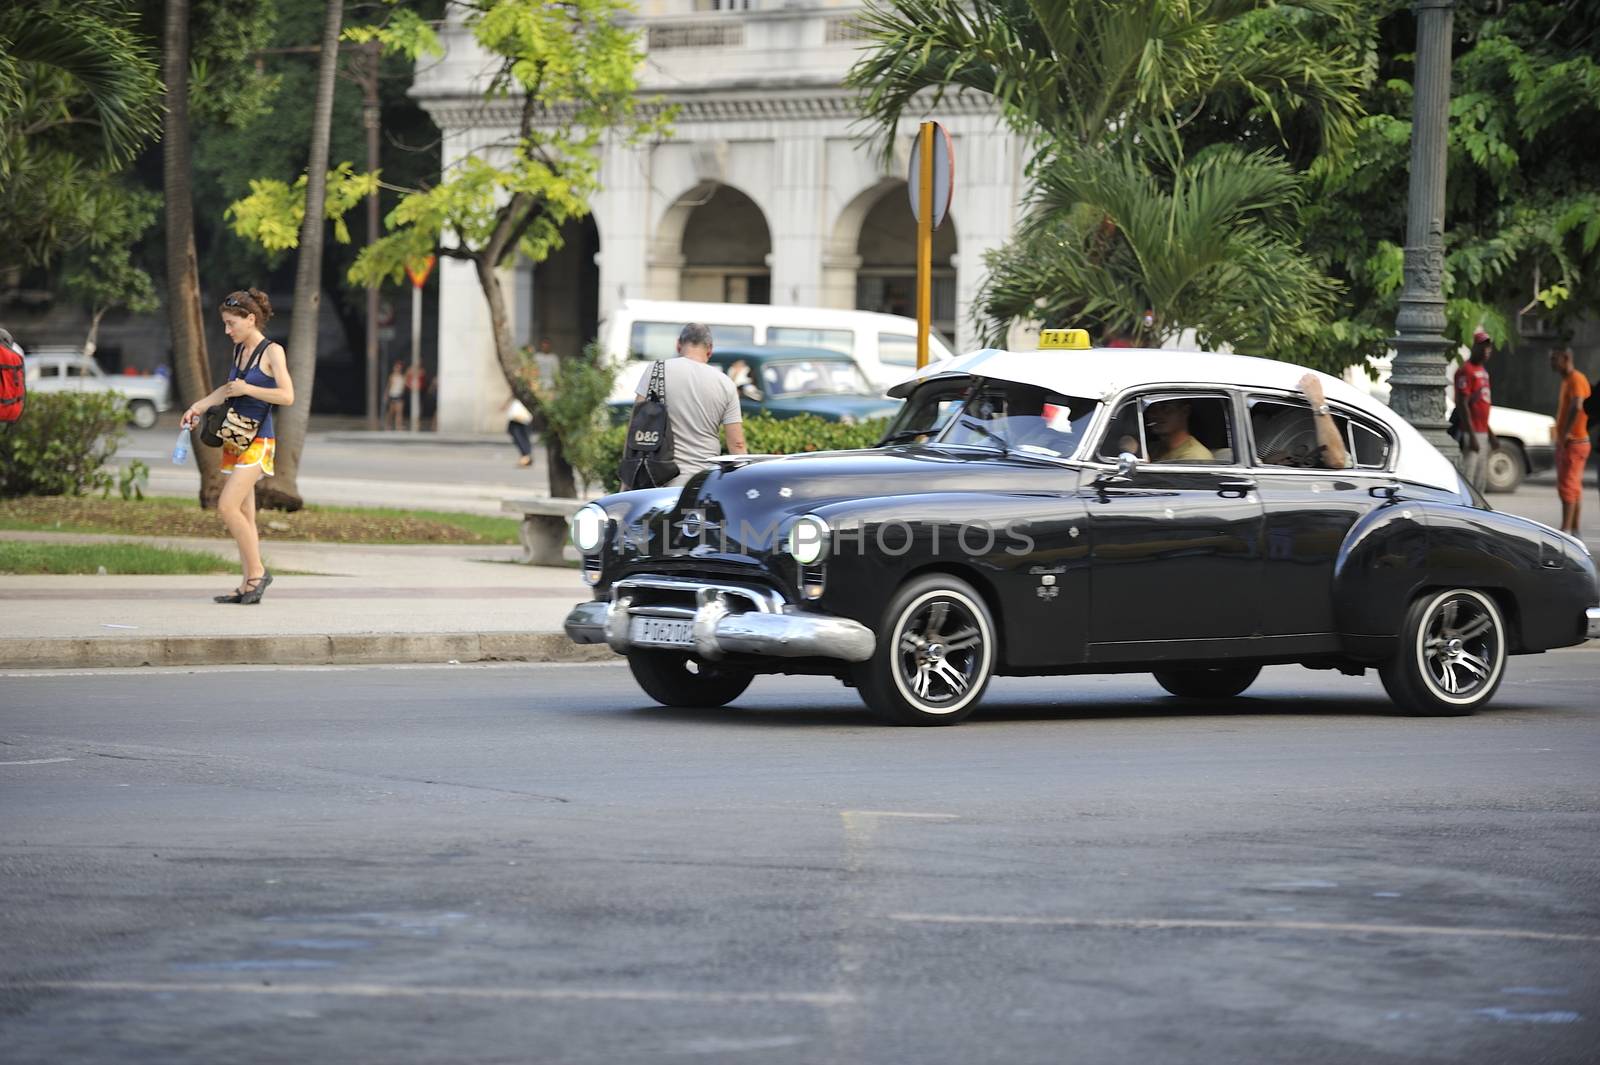 Old Havana, Cuba, -  August  2013. The old vintage-styled car in the historical center of Havana is waiting for the tourists to board. Riding an auto of the 20's - 50's is one of the attractions for the tourists in Cuba. Such cars are used for any goal, not only tourism, but taxis and personal needs.